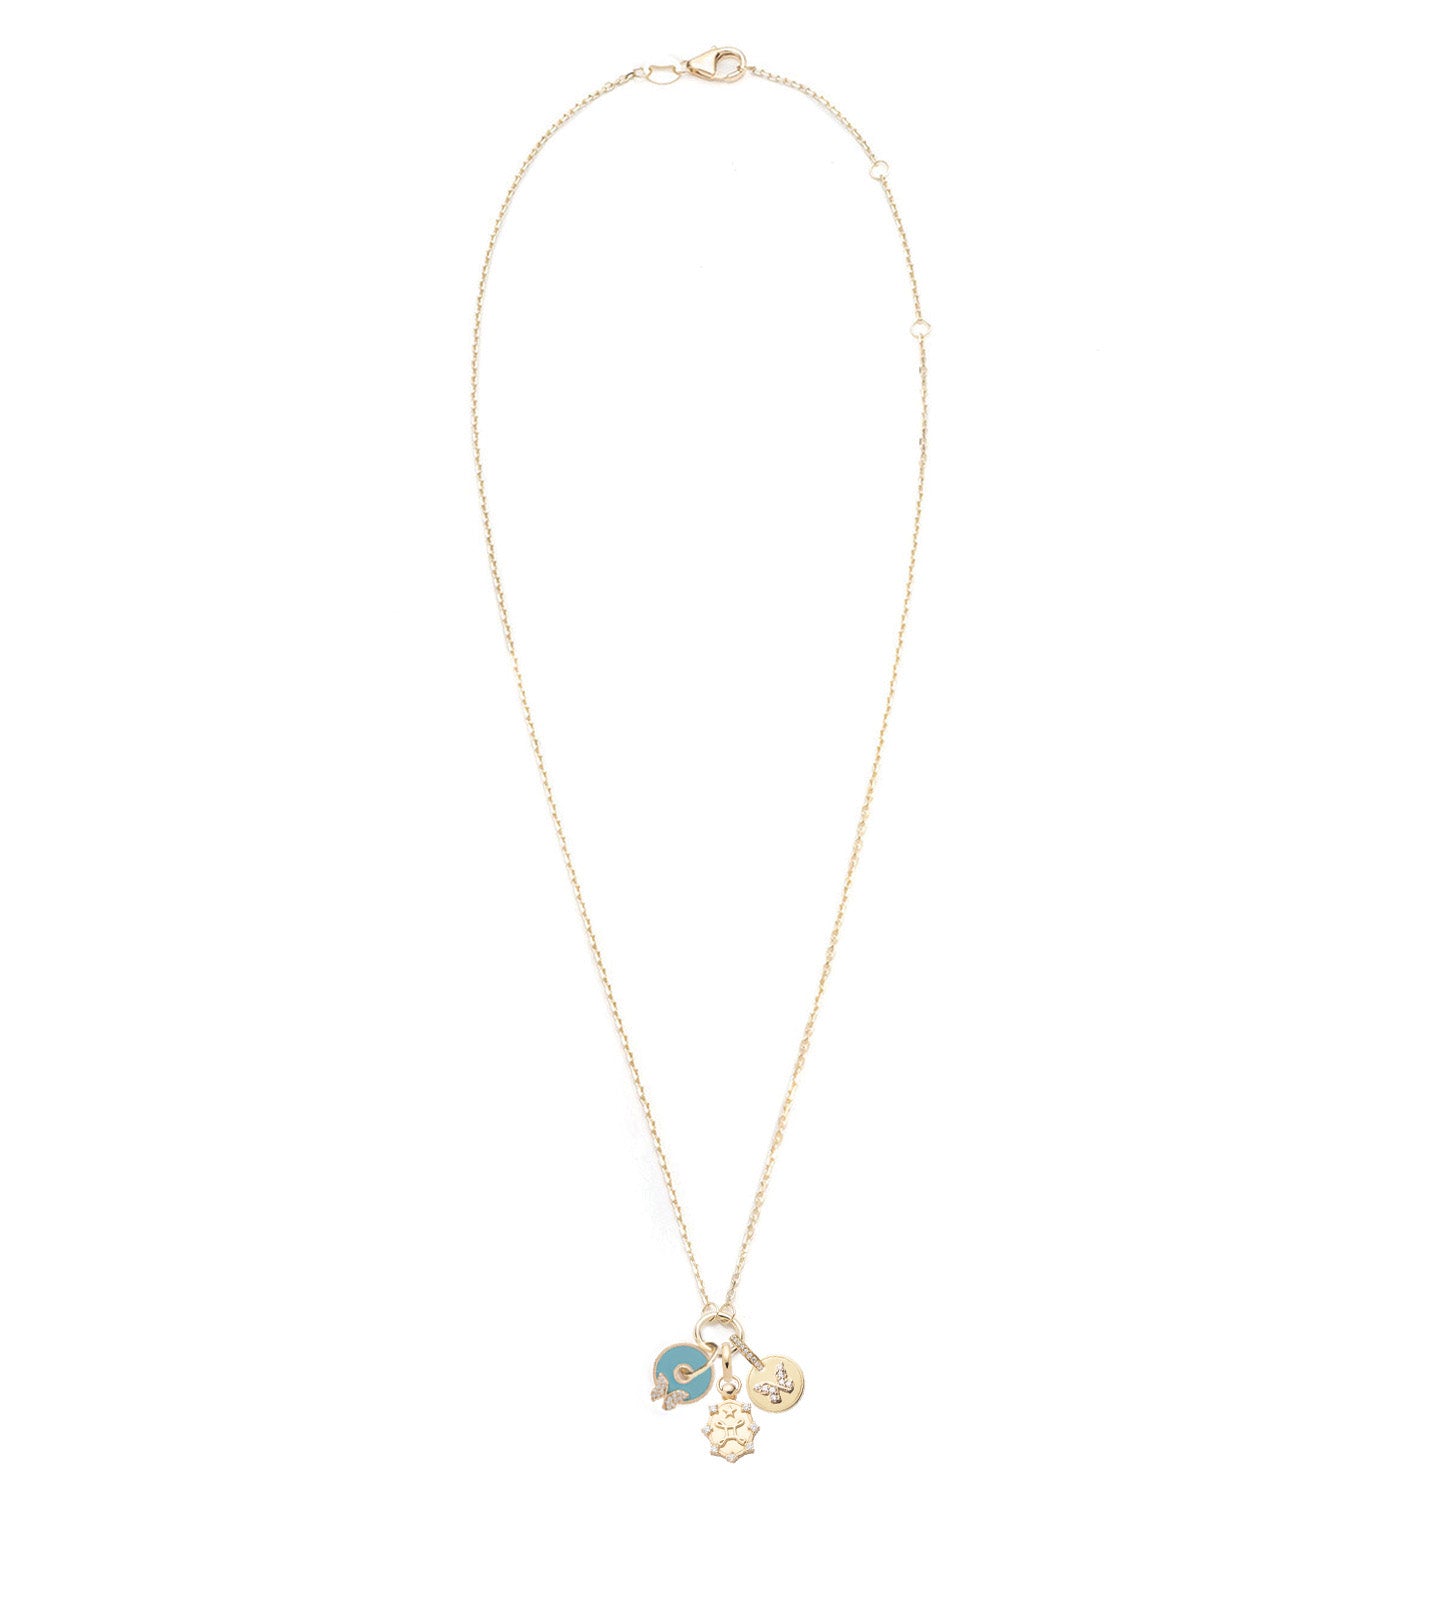 Aqua Butterfly Disk Drop Necklace Mini Story